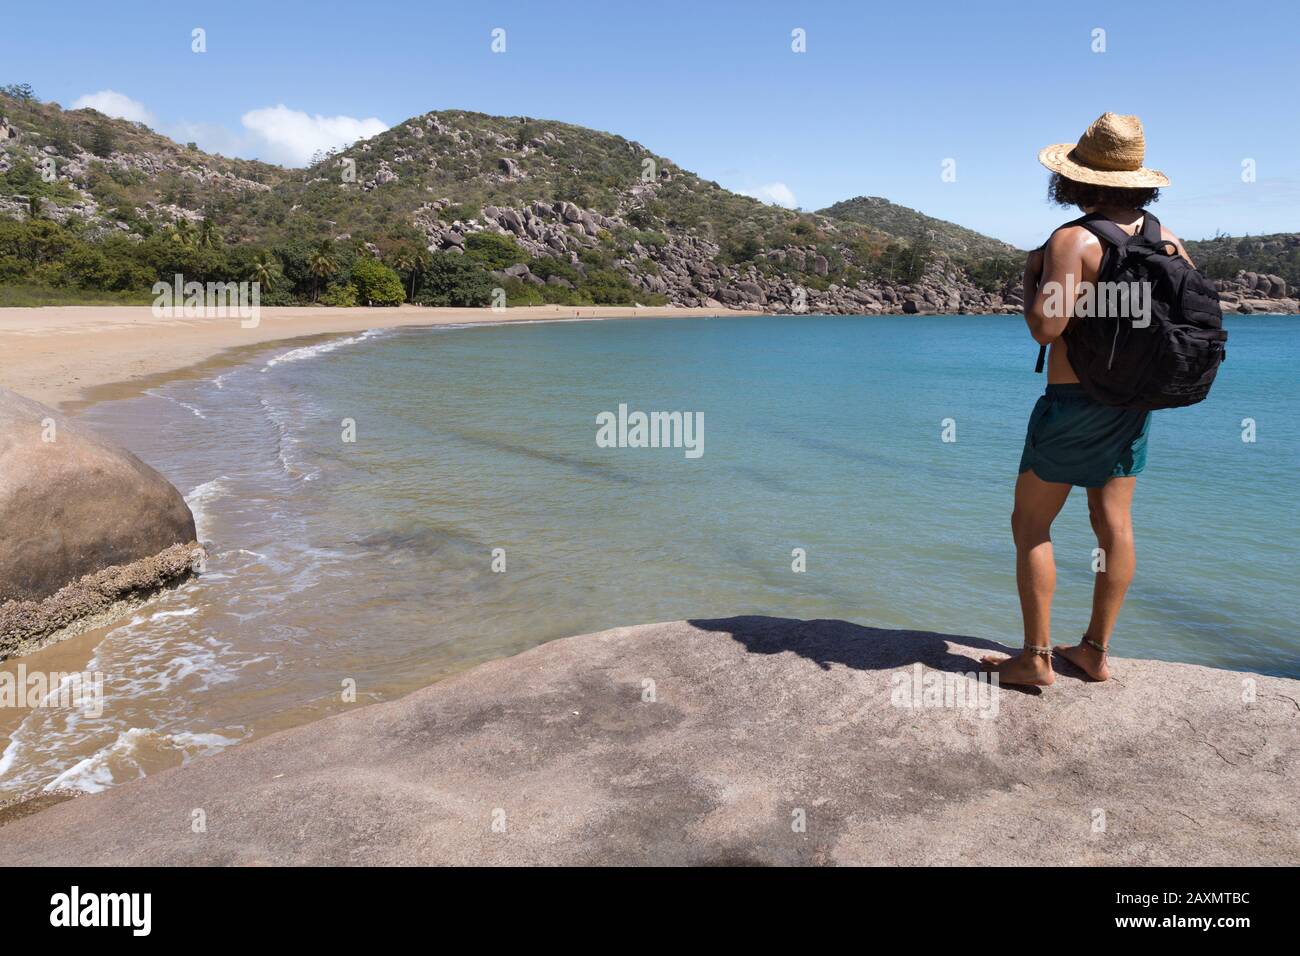 Backpacker with hat and swimsuit, on top of rock, admiring the bay Stock Photo